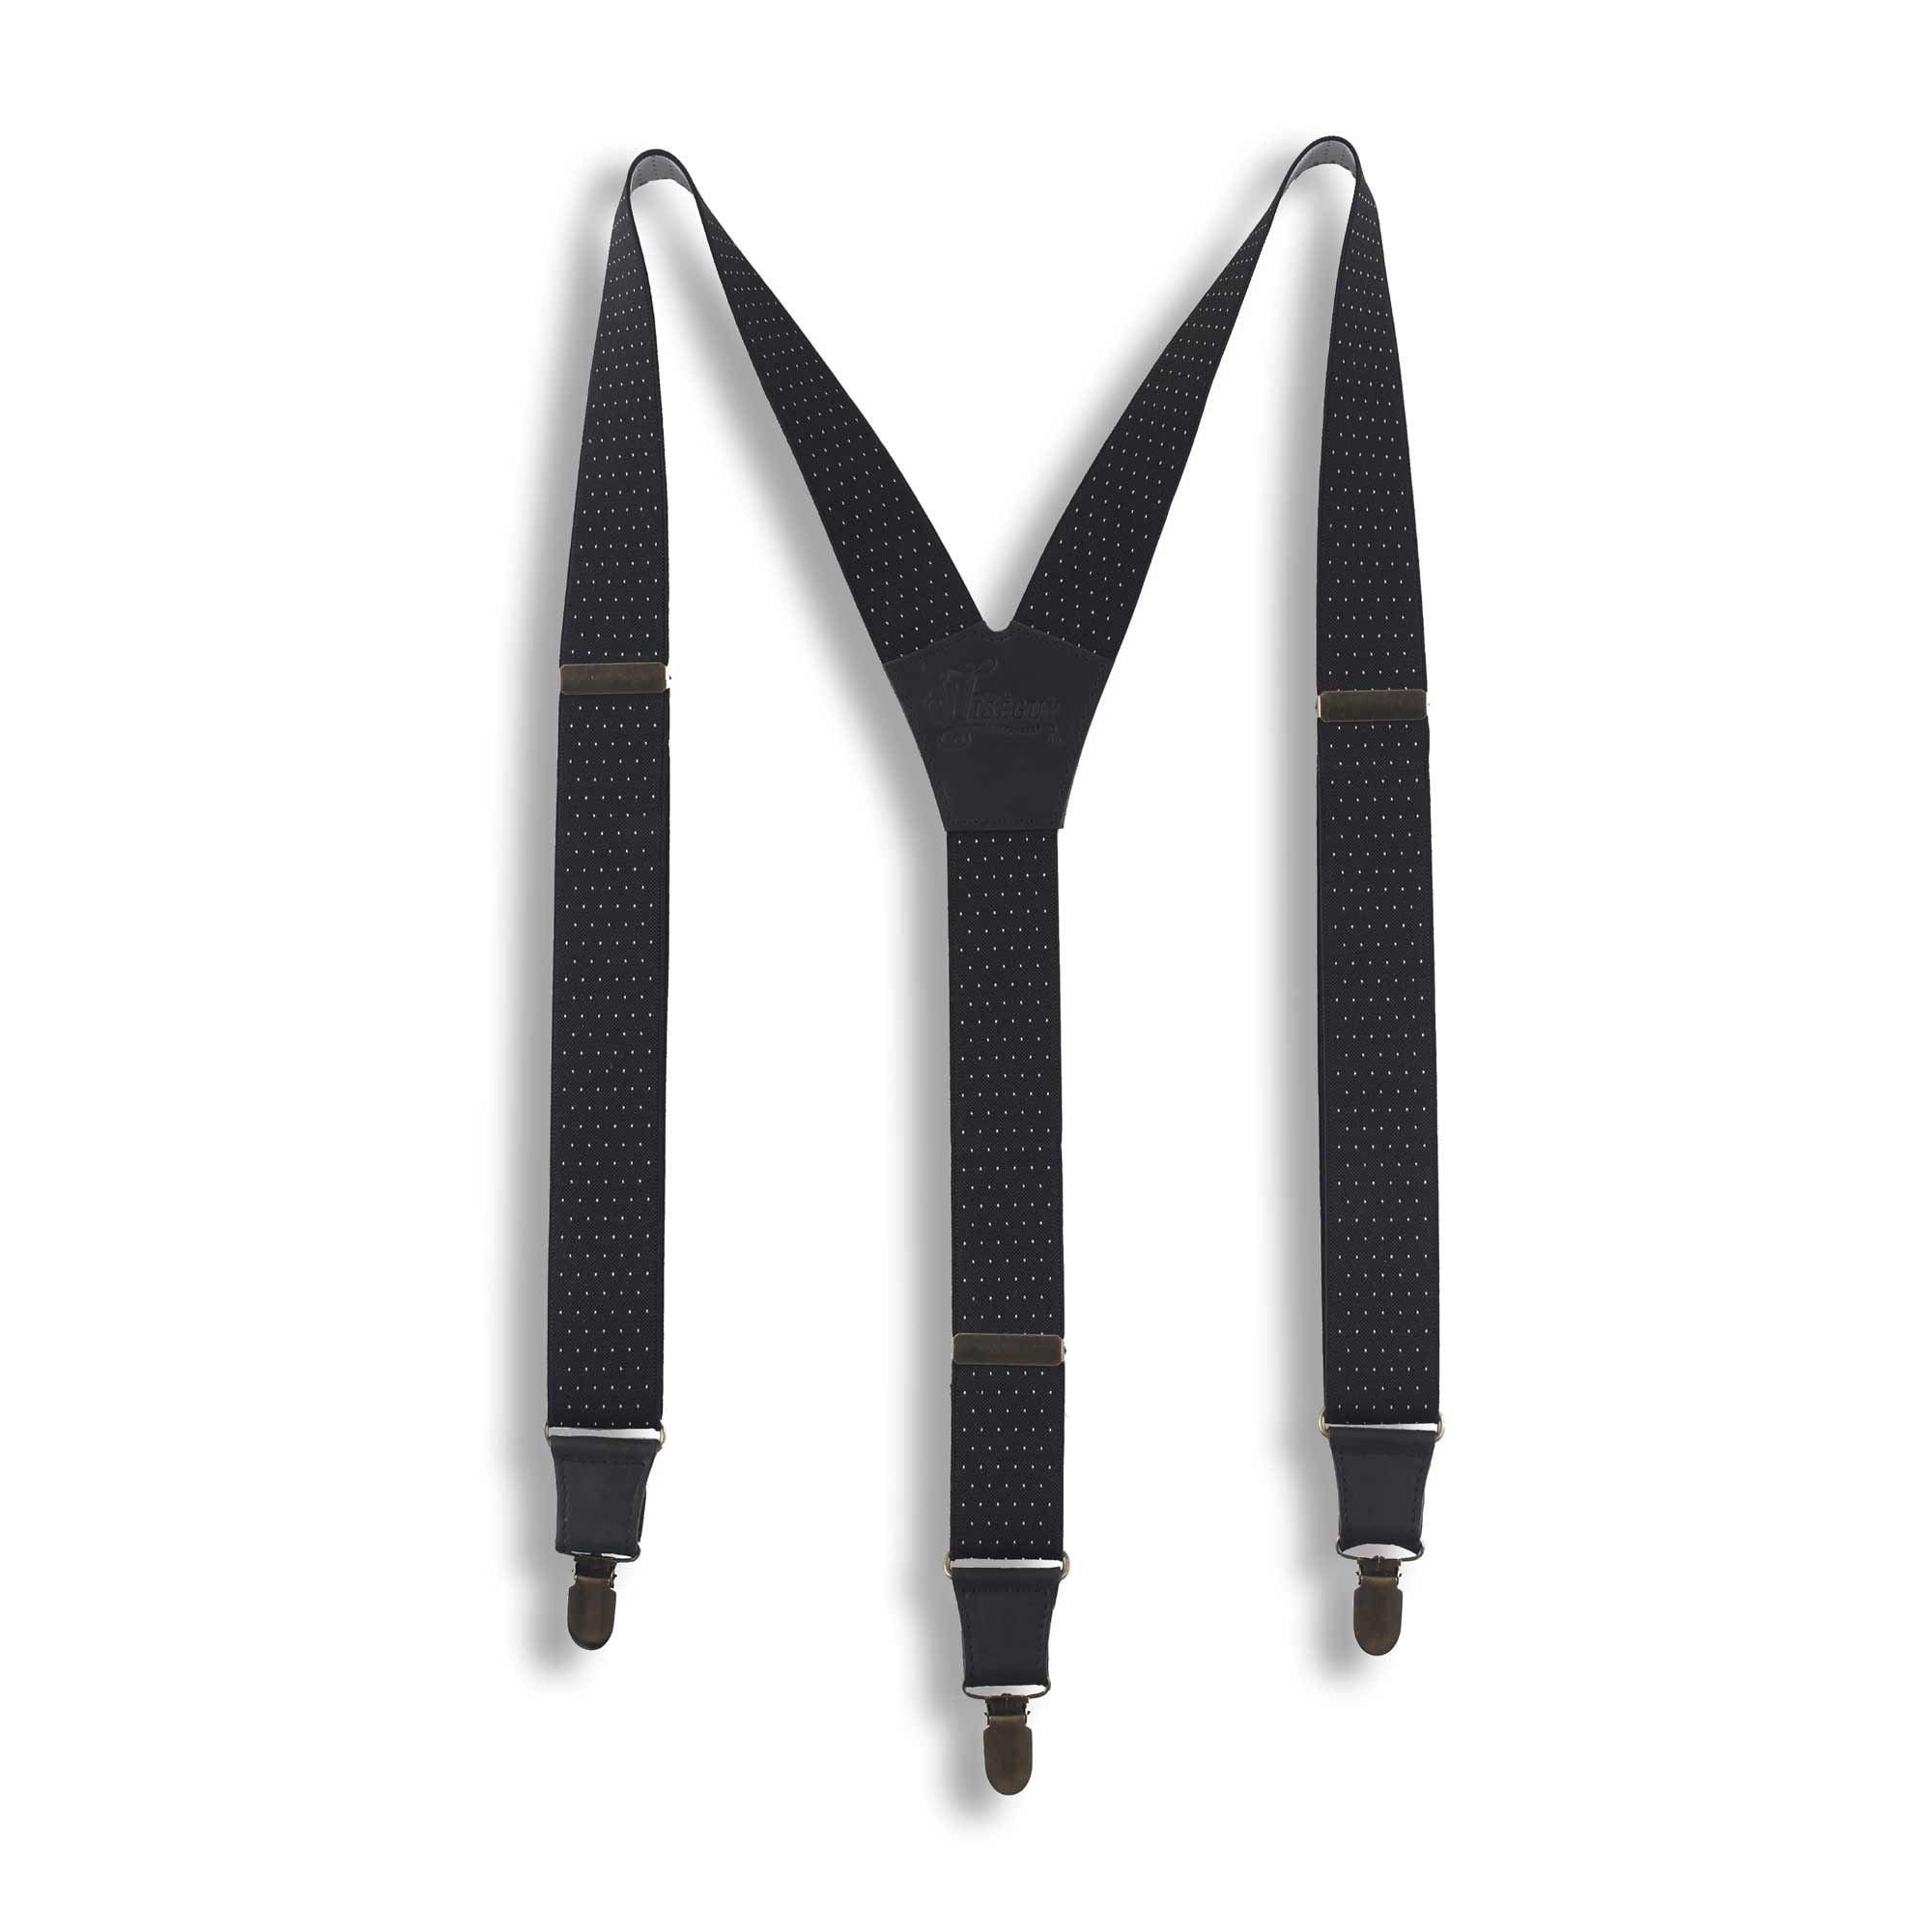 The Banker Formal Suit Suspenders 1.3" wide with Black leather parts - Wiseguy Suspenders